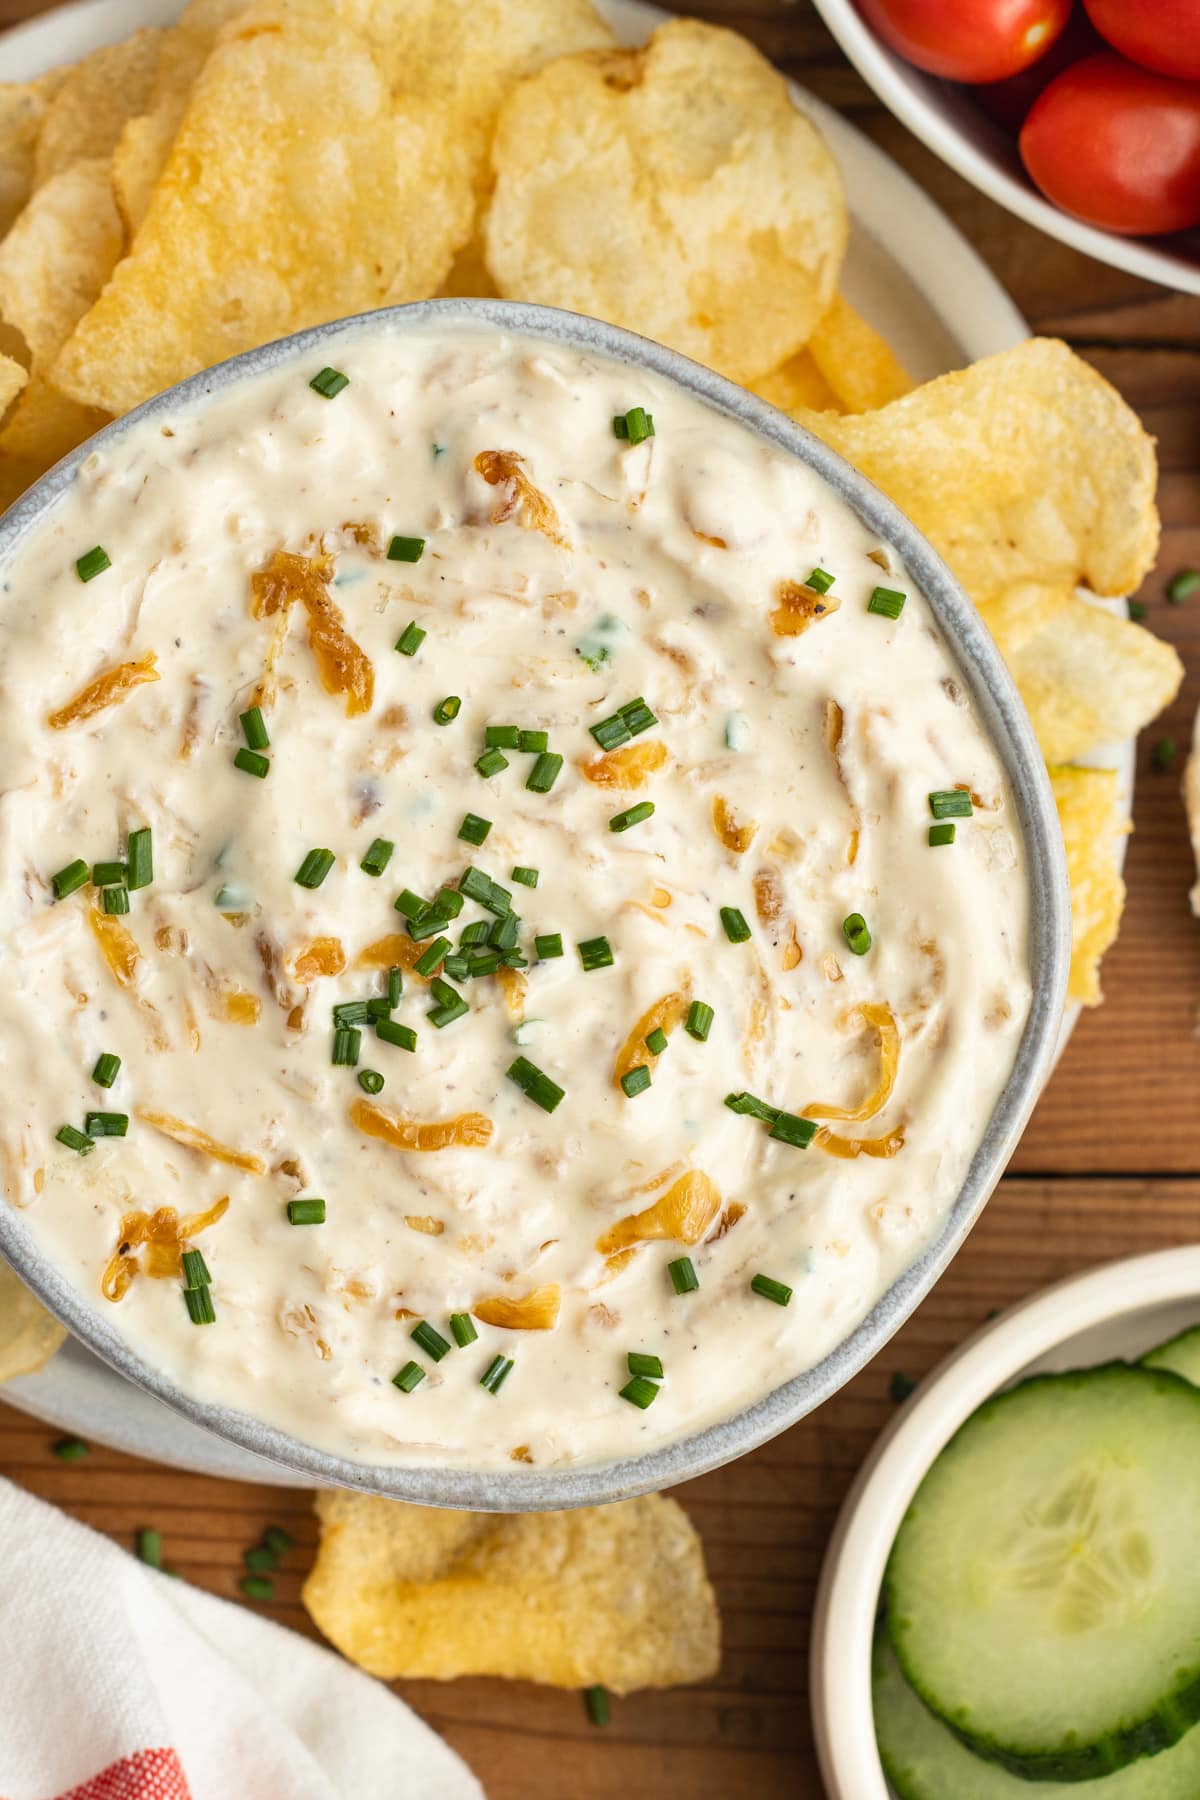 This is a picture of the caramelized onion dip with greek yogurt surrounded with chips and veggies.